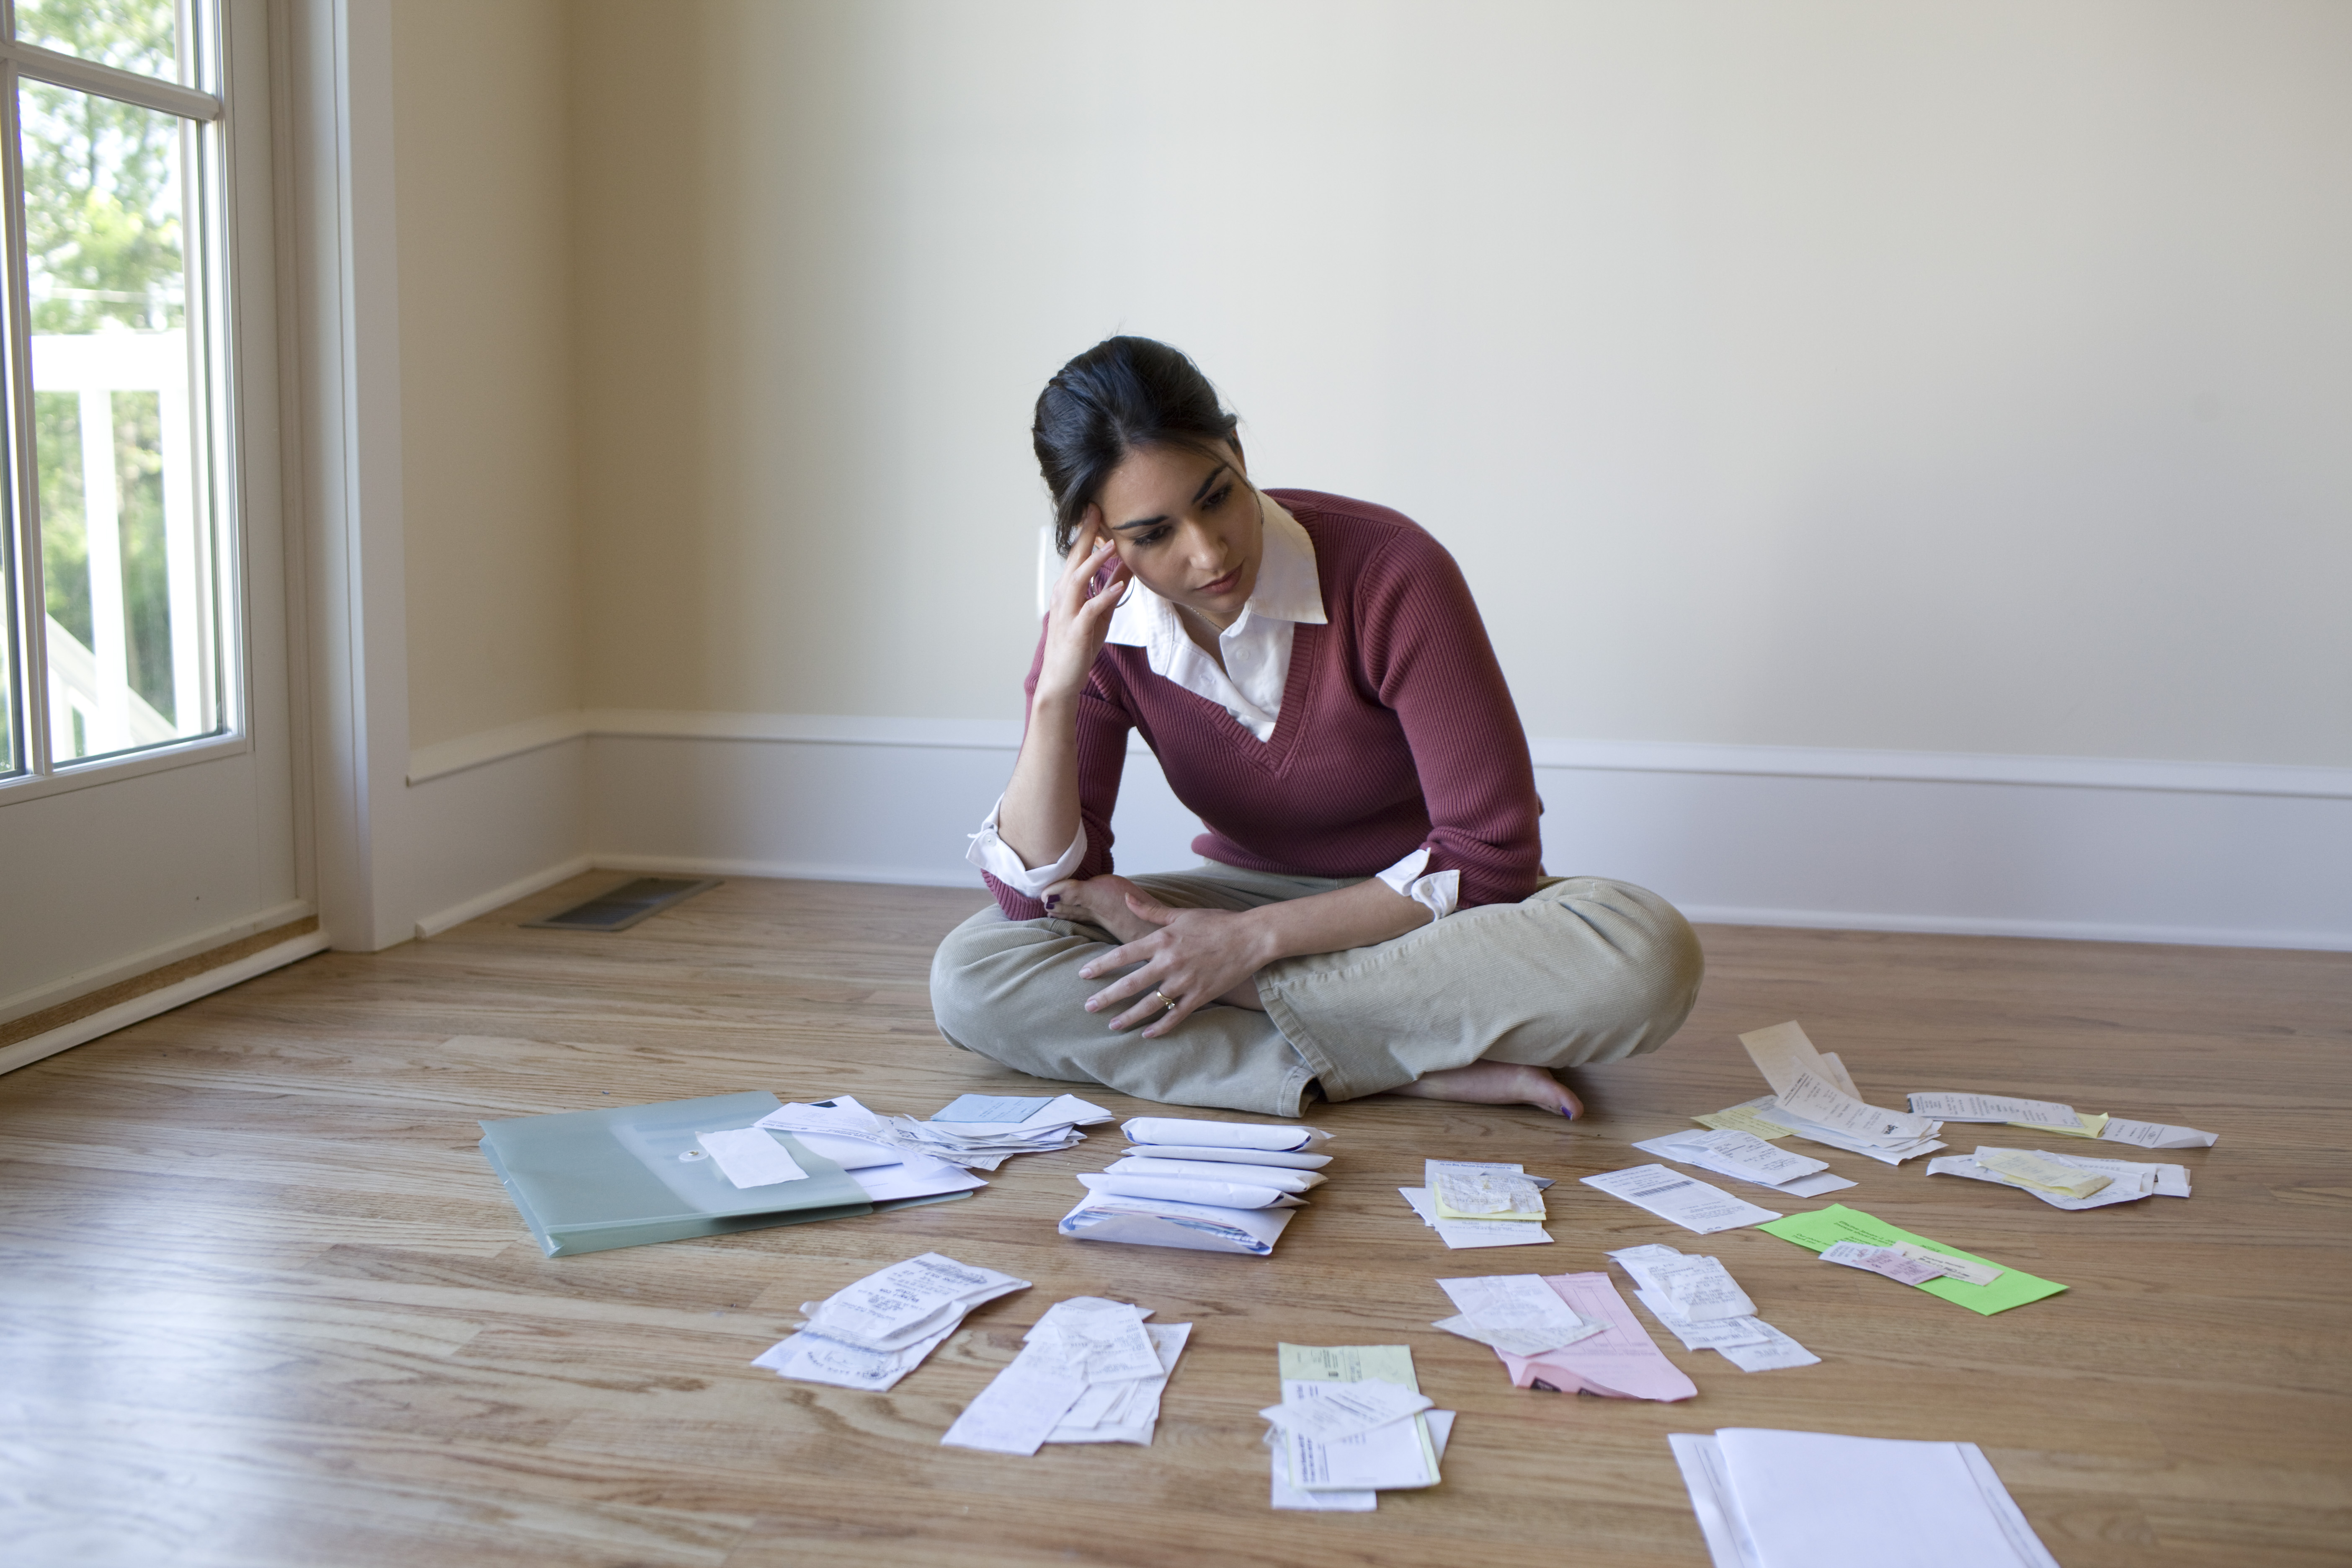 Woman looking at bills and receipts on floor | Source: Getty Images